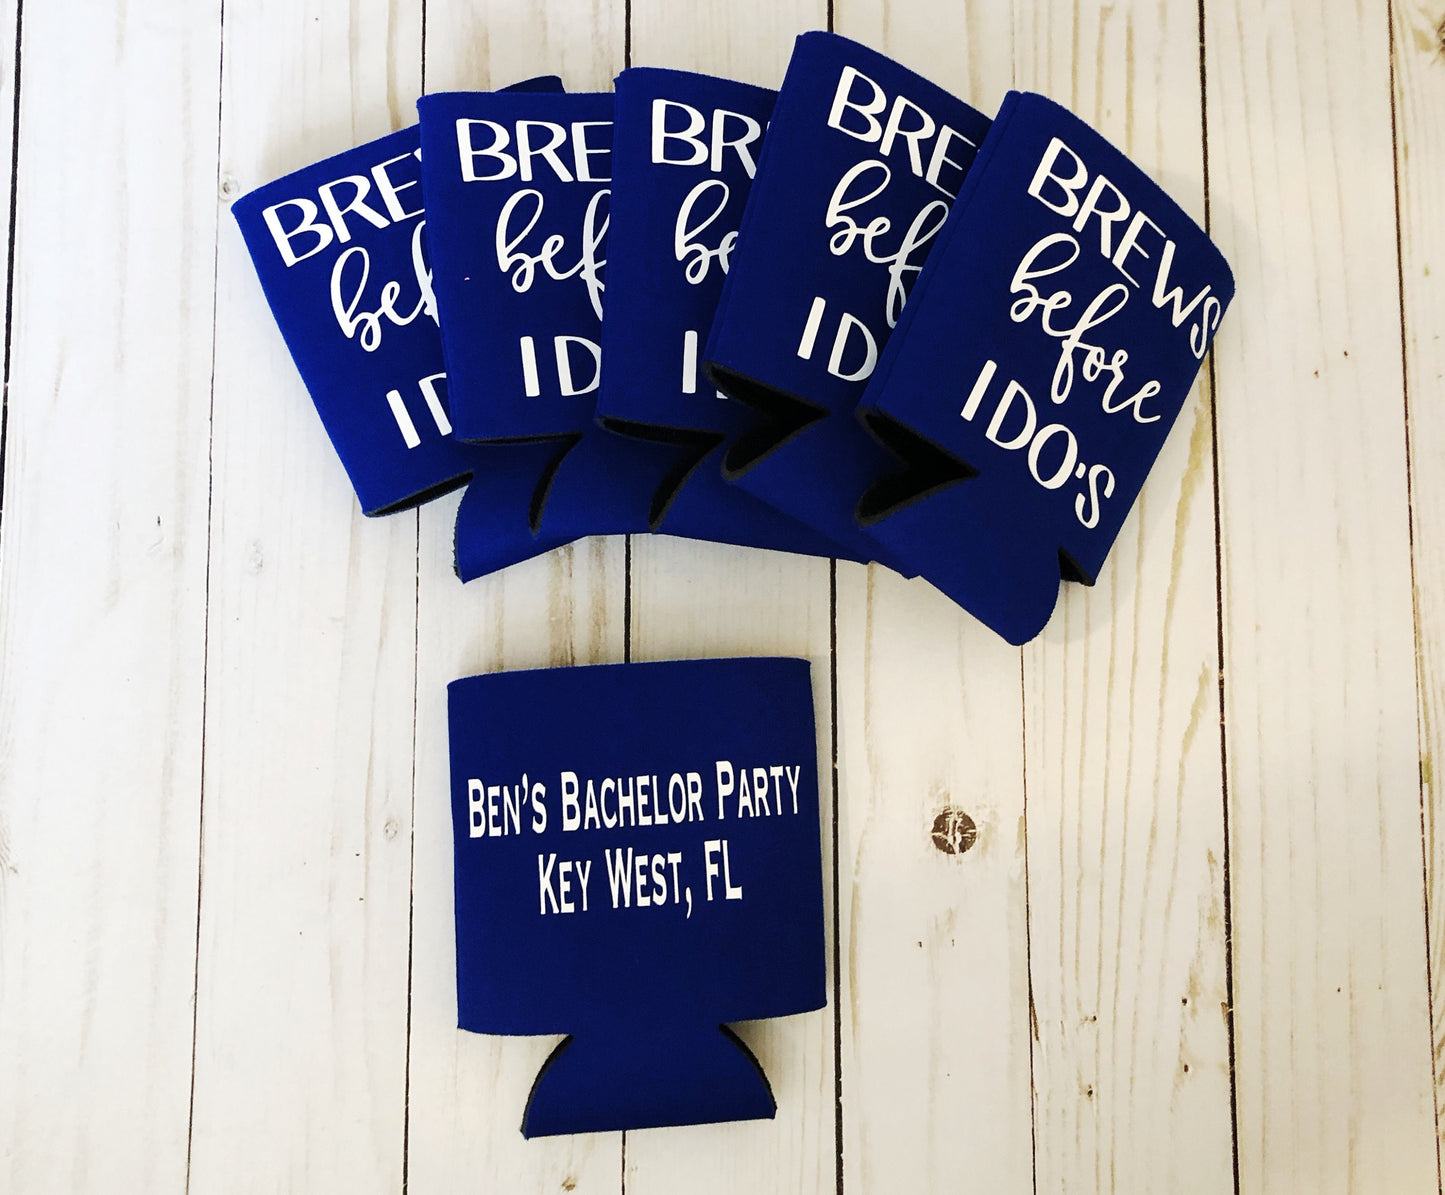 Bachelor Party Gifts, Bachelor Party Favors, Bachelor Gifts, Bachelor Gifts for Men, Brews Before I Dos, Bachelor Party, Bachelorette Gifts